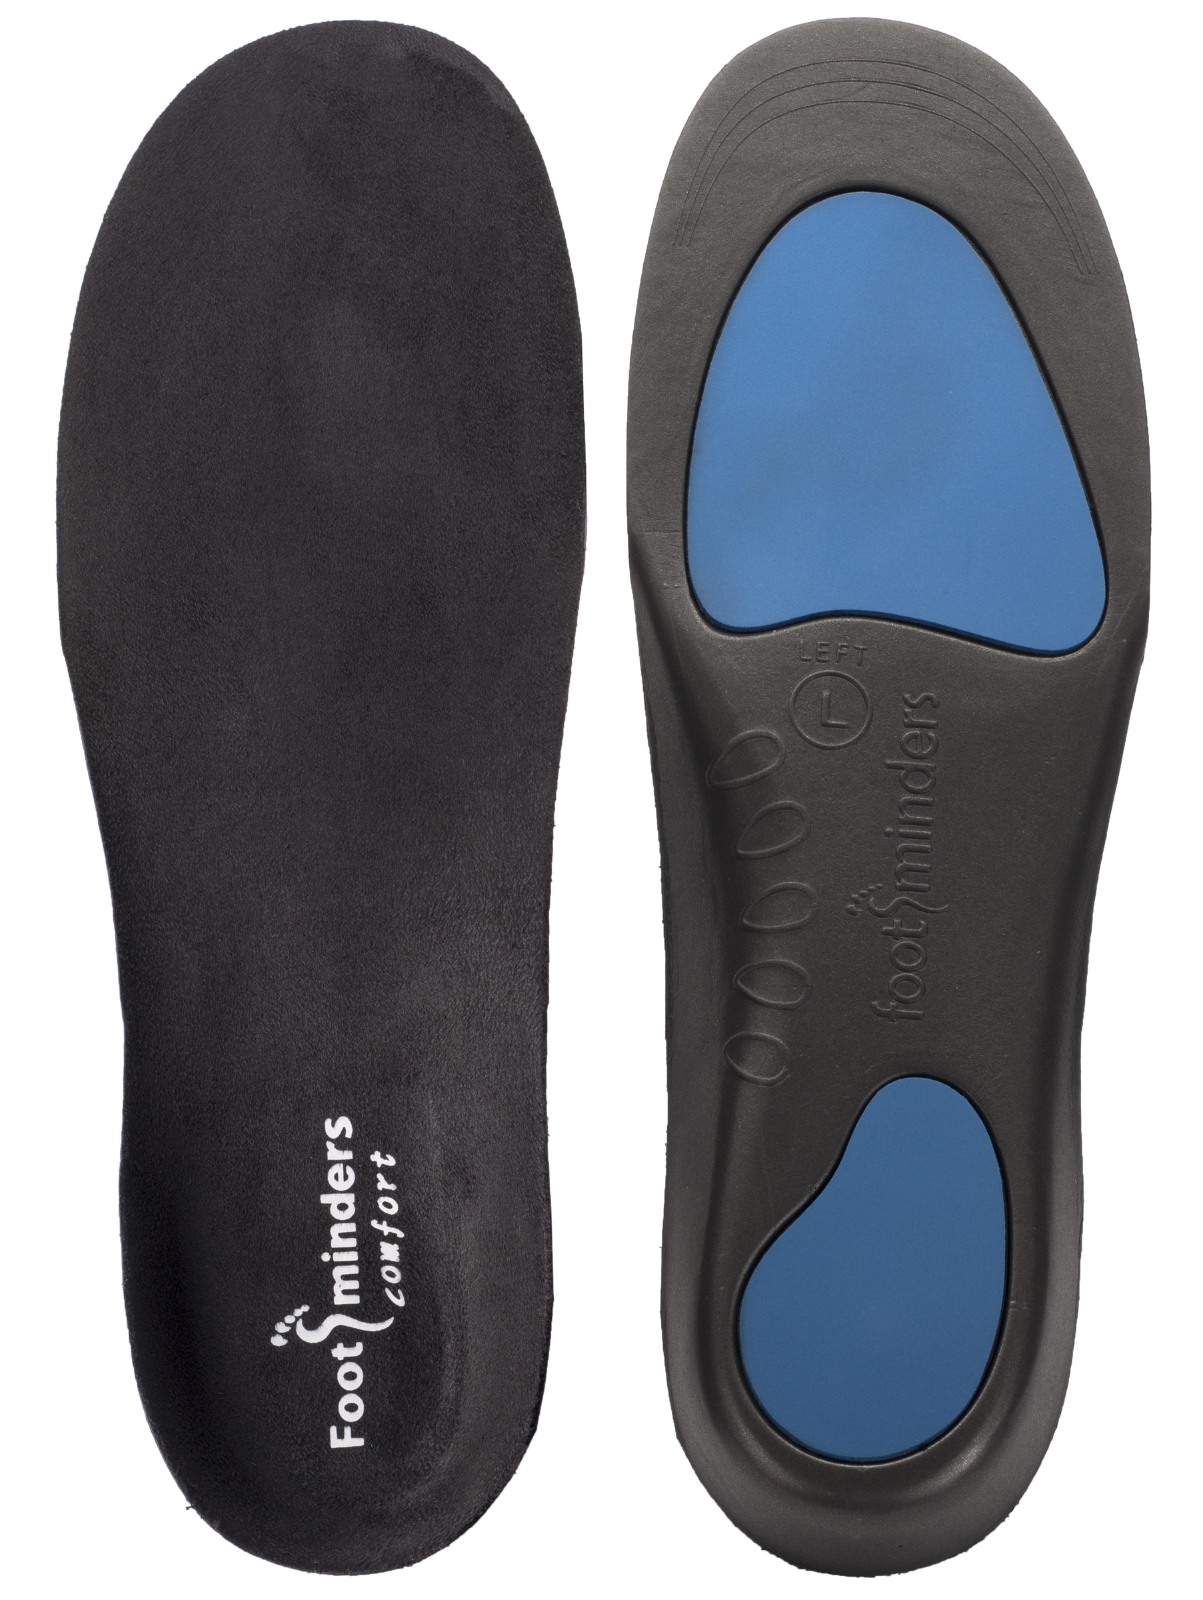 Footminders Comfort Arch Support Orthotic Insoles